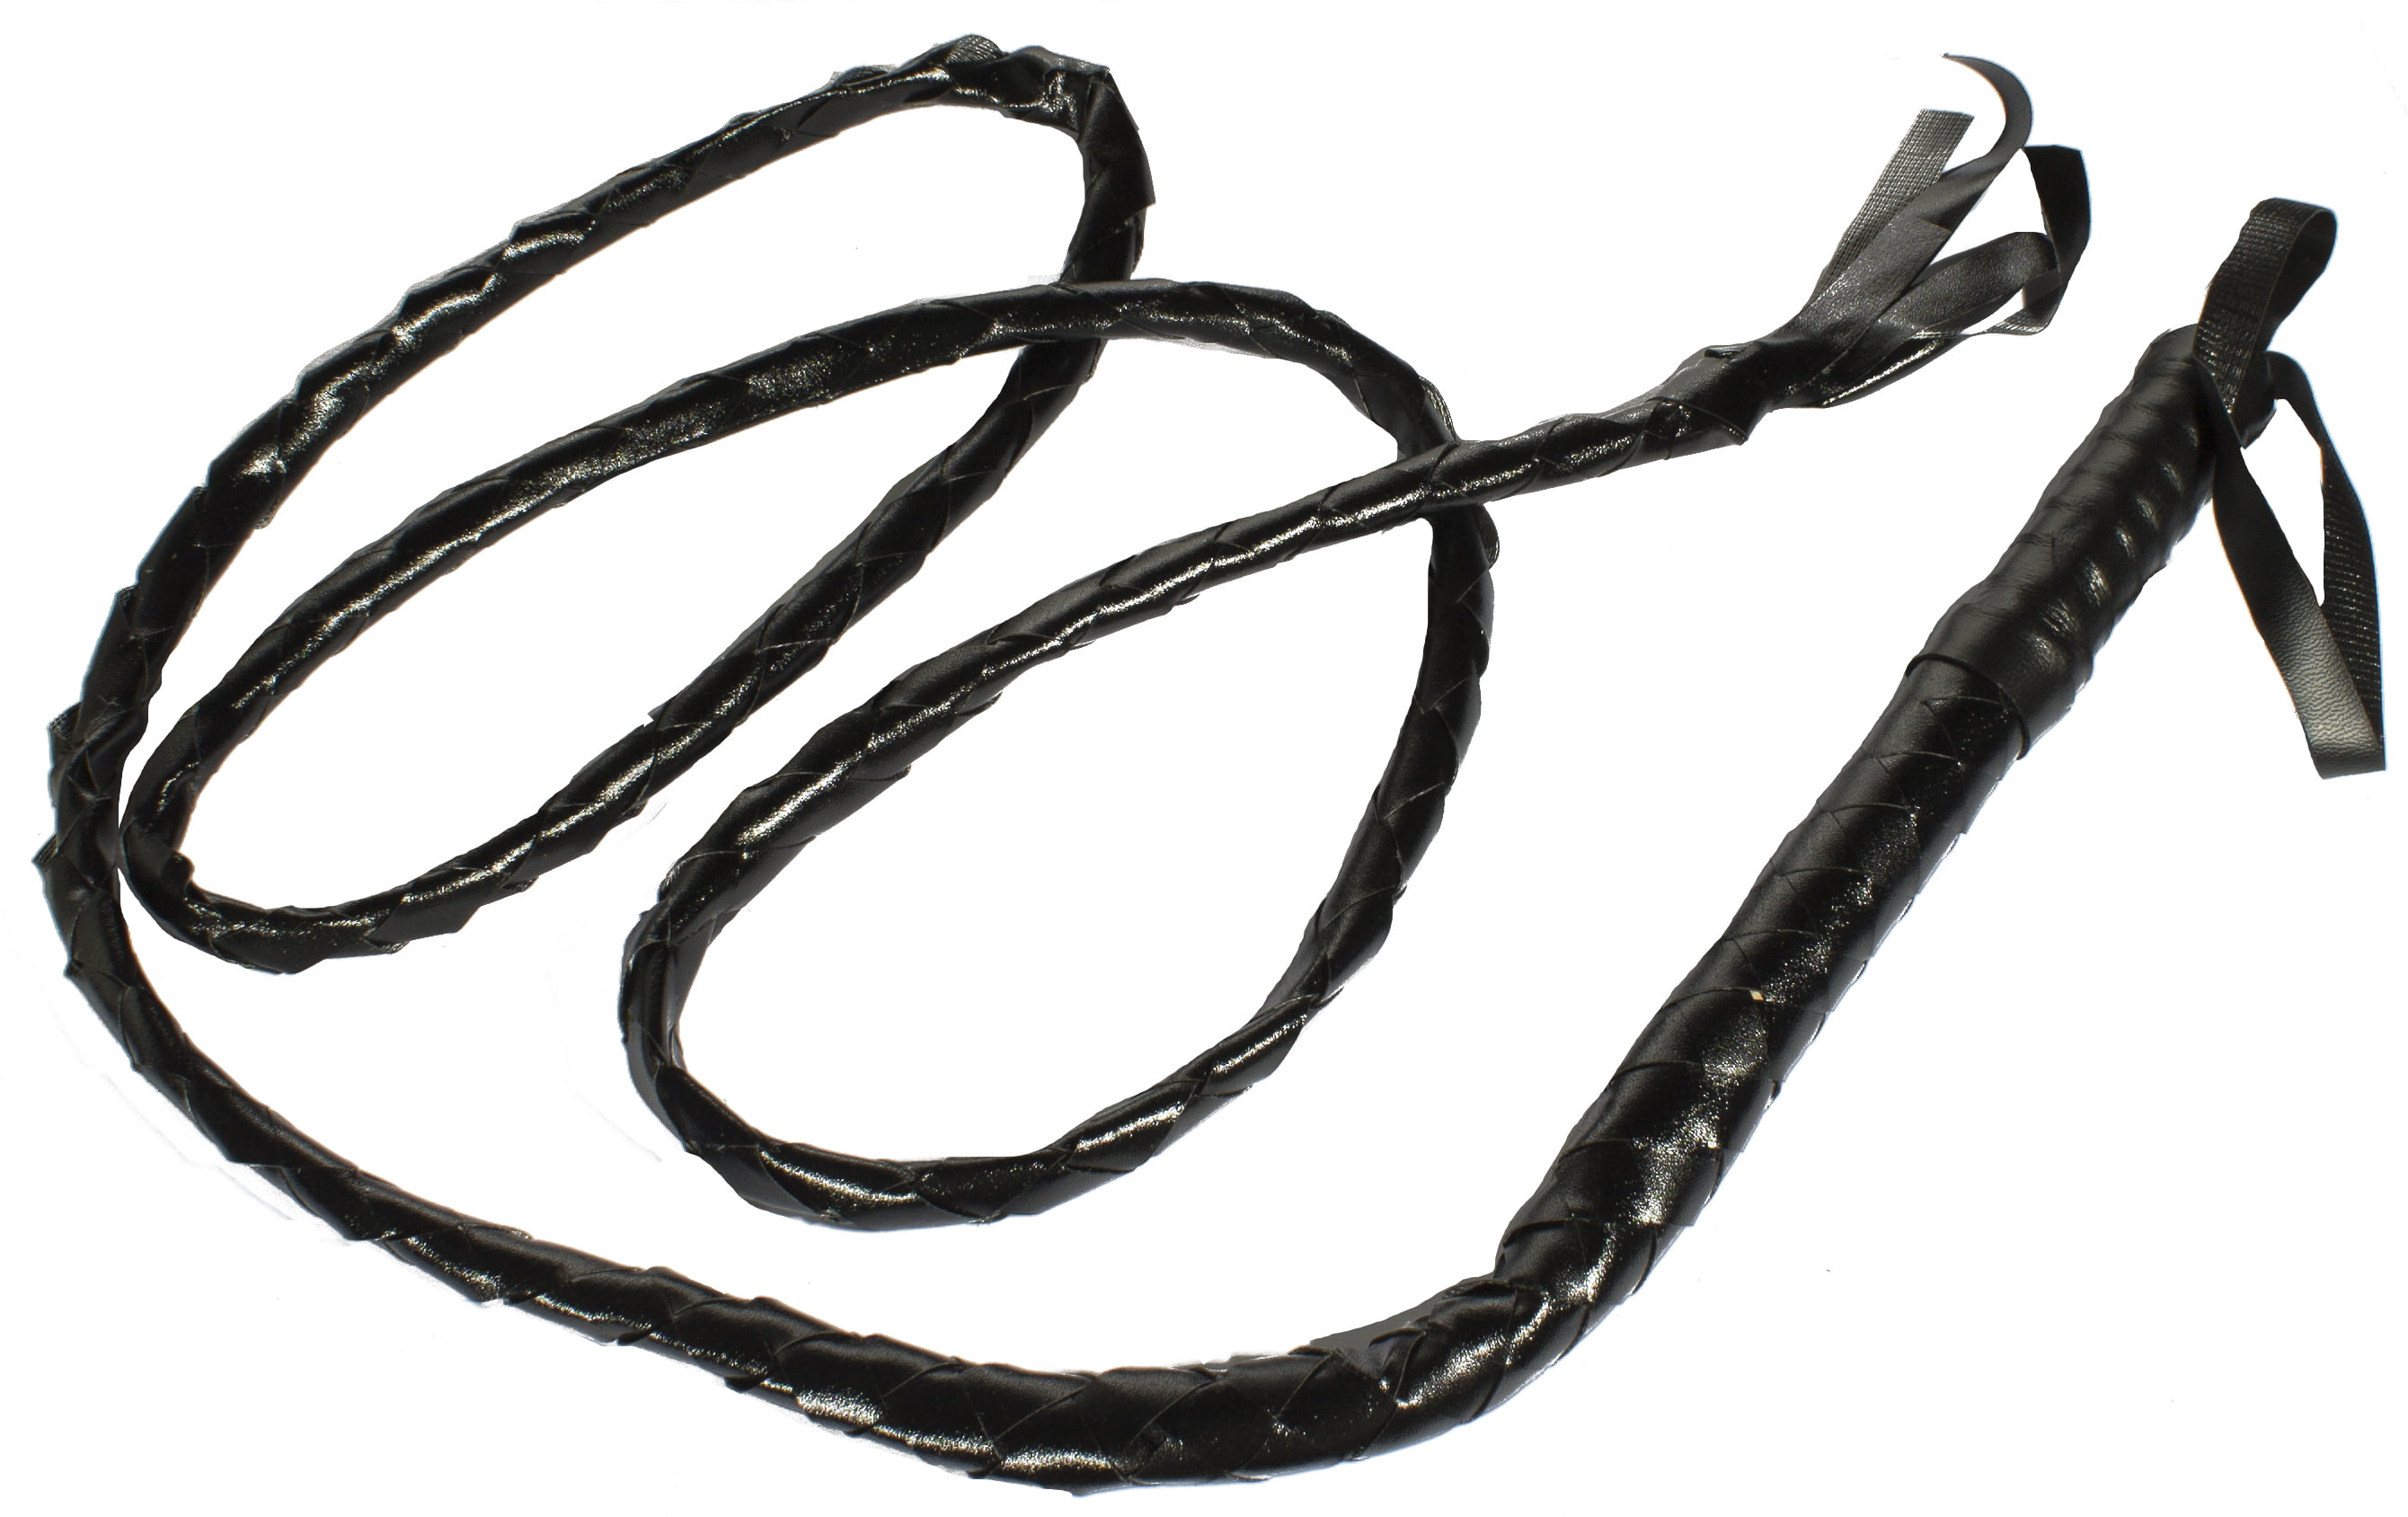 BLACK LEATHER LONG WHIP FANCY DRESS COSTUME ACCESSORY 